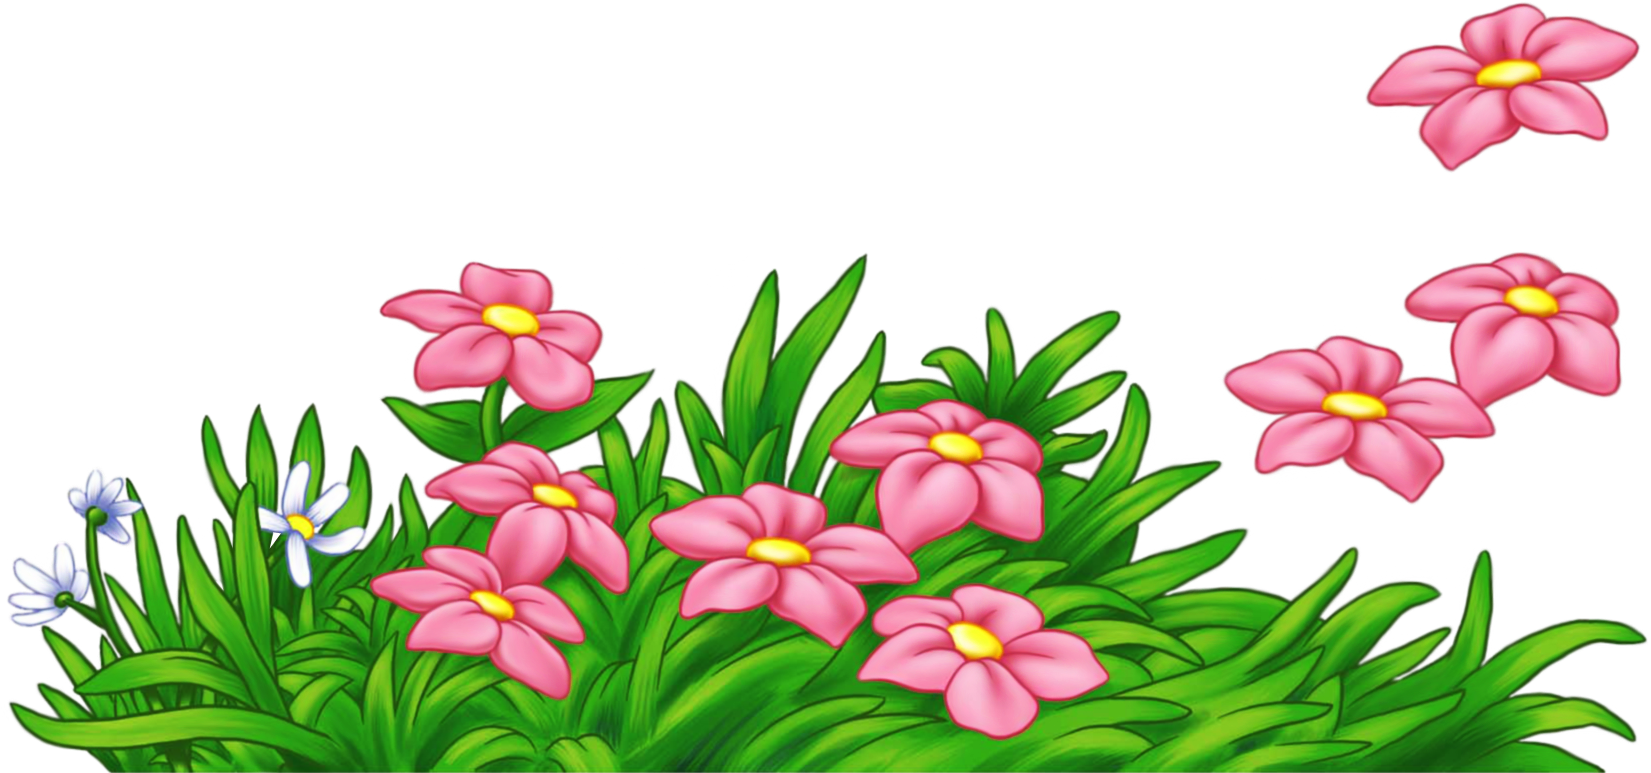 African Grass Images - Flower Png Clipart (1740x846)